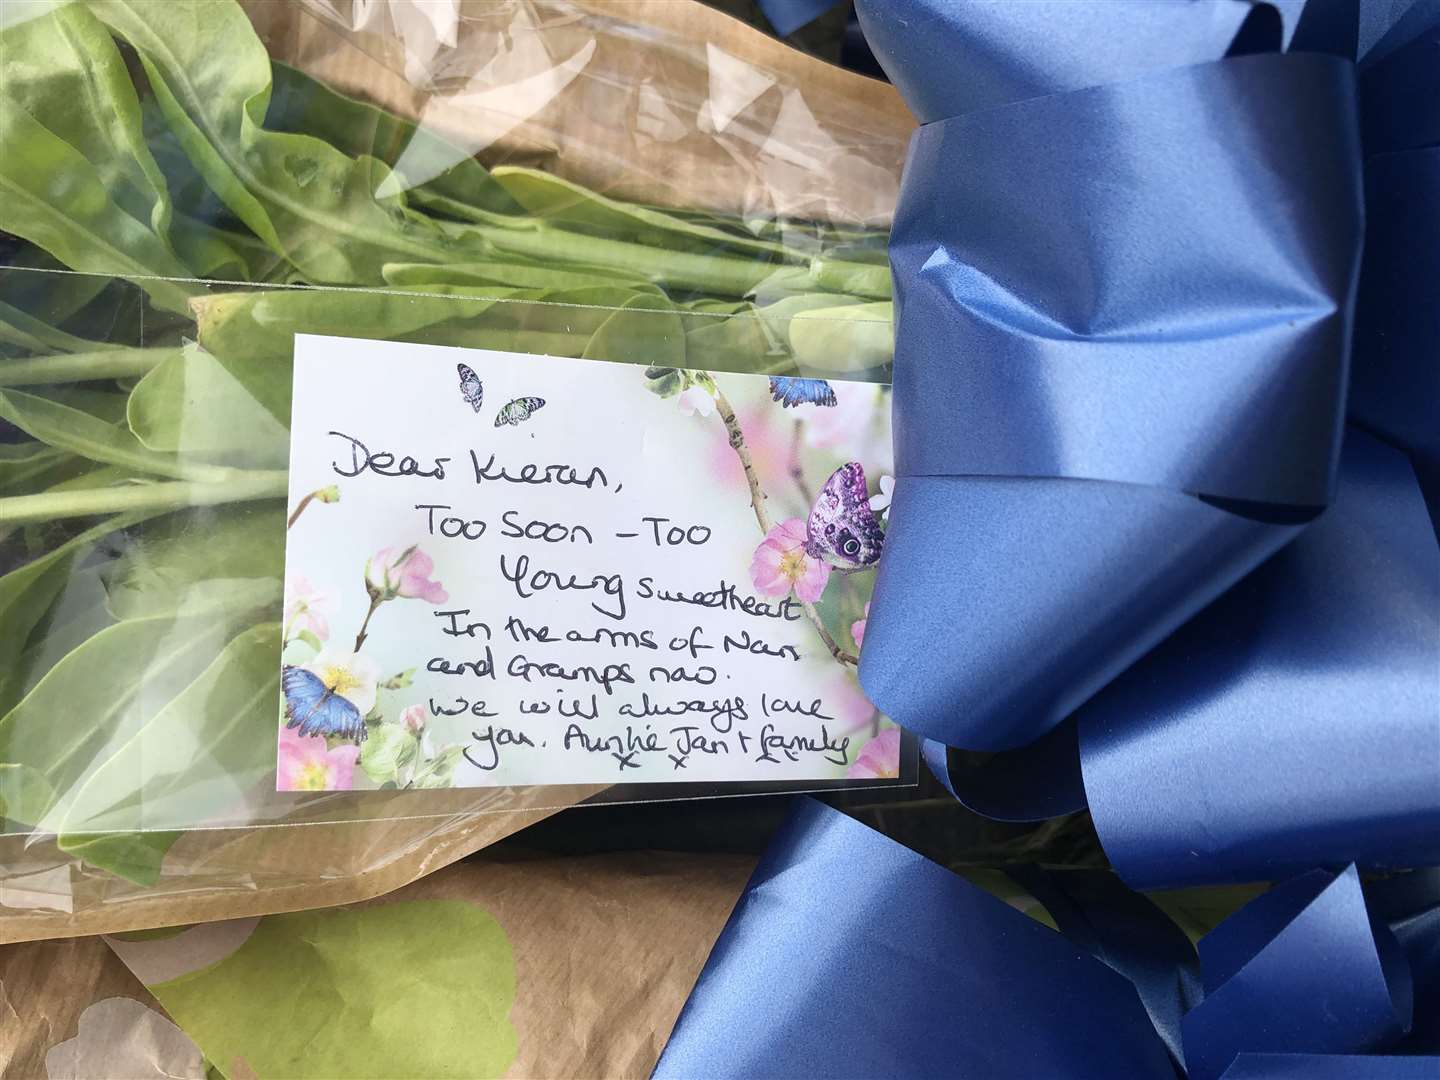 One of the tributes left at the scene